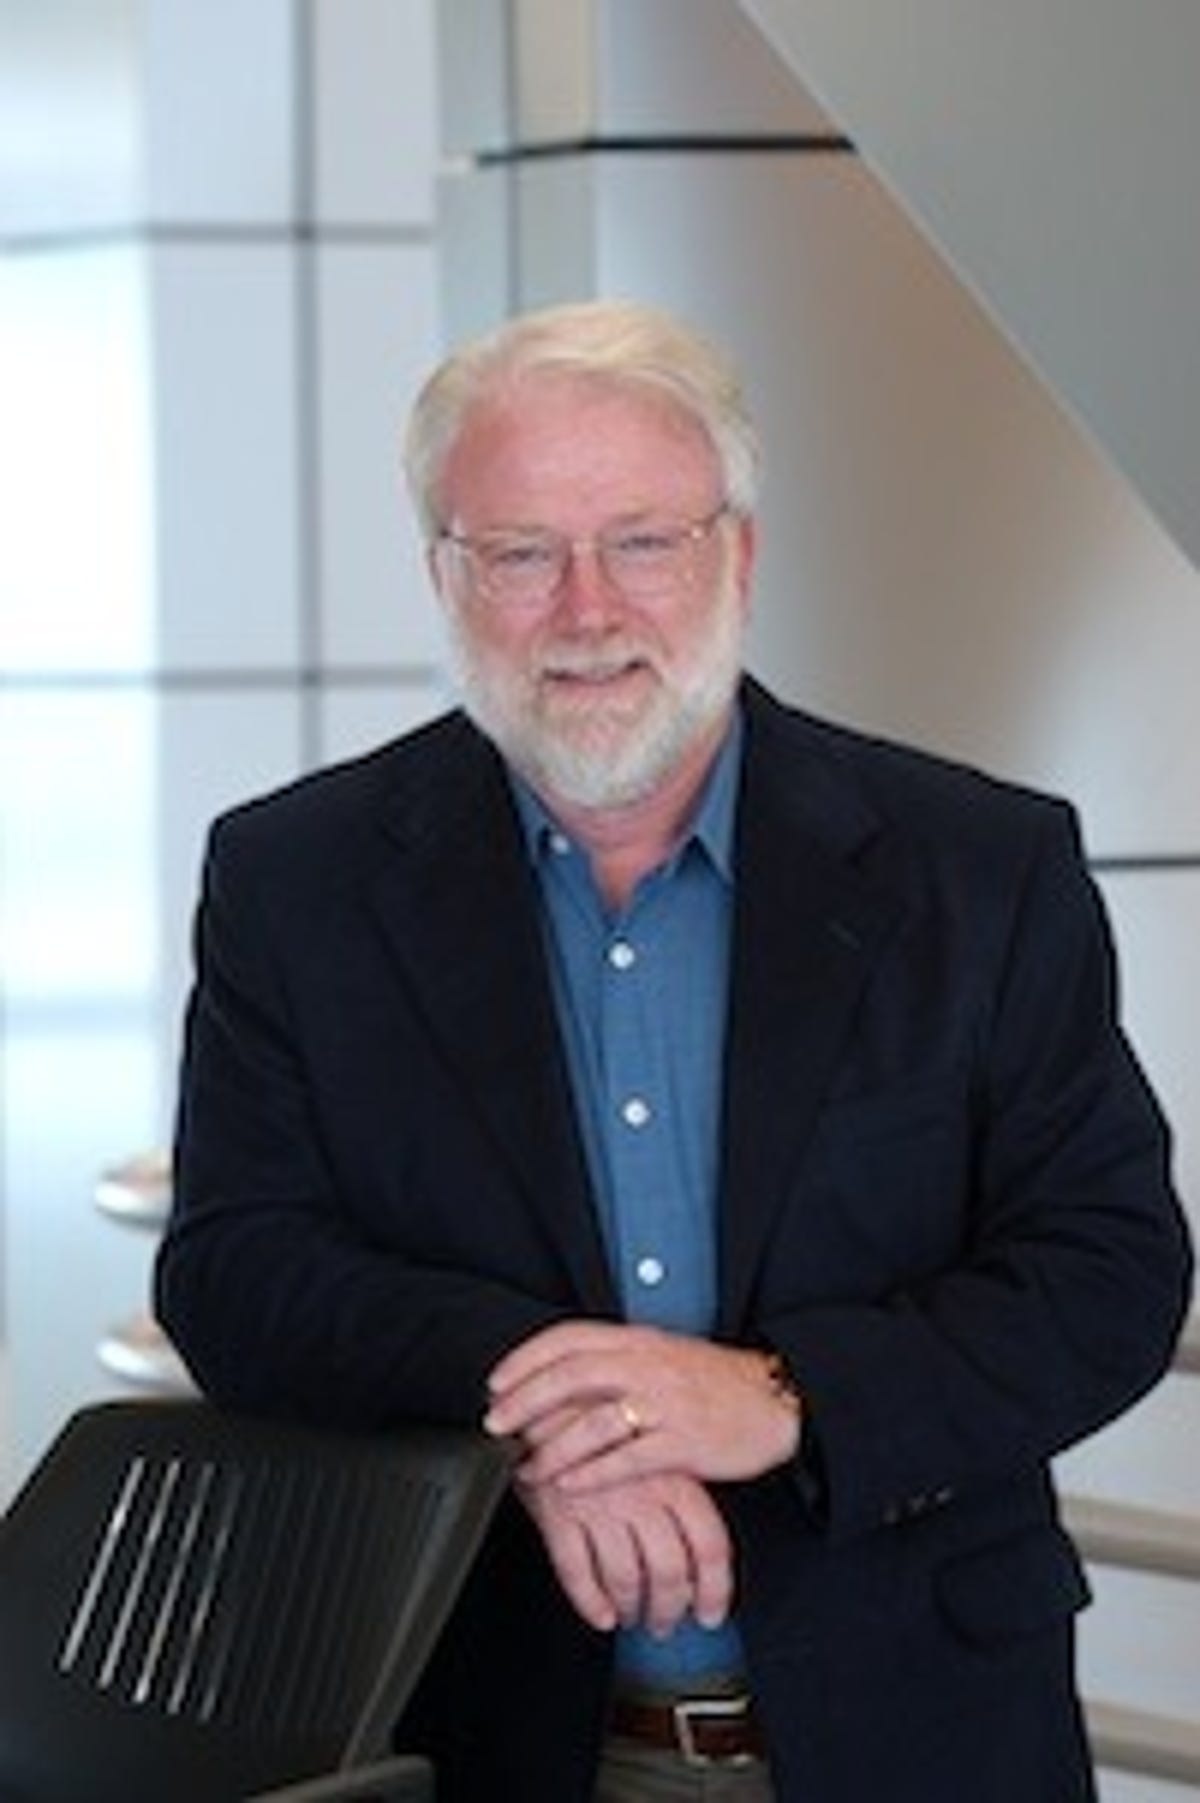 Thom Dunning directs the Institute for Advanced Computing Applications and Technologies and the NCSA.